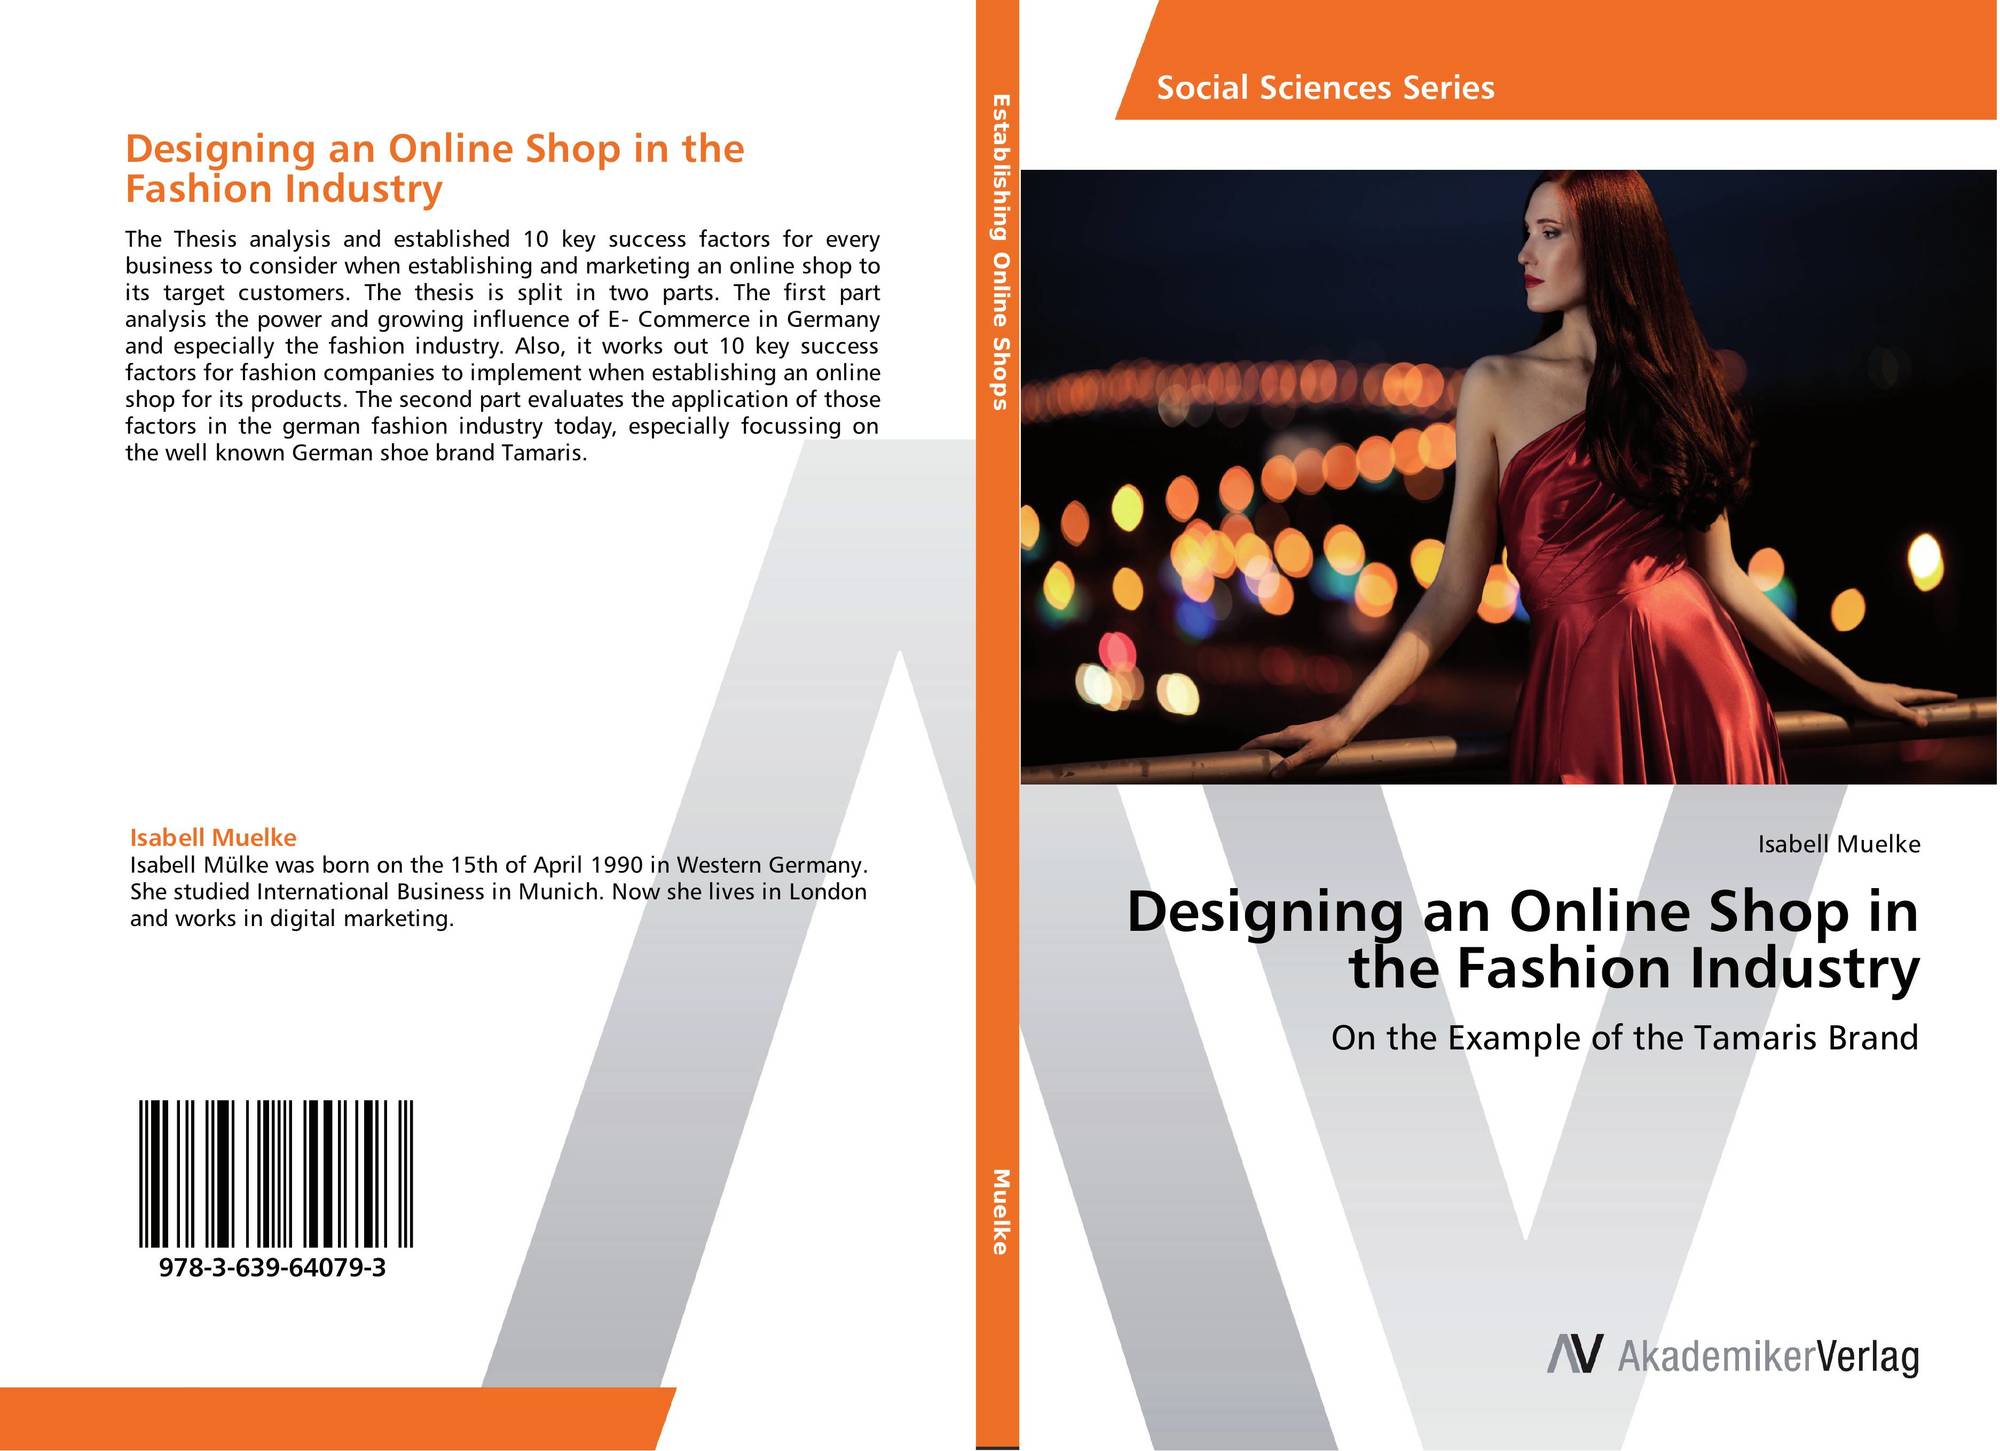 Designing an Online Shop in the Fashion Industry, 978-3-639-64079-3, ,9783639640793 by Isabell Muelke